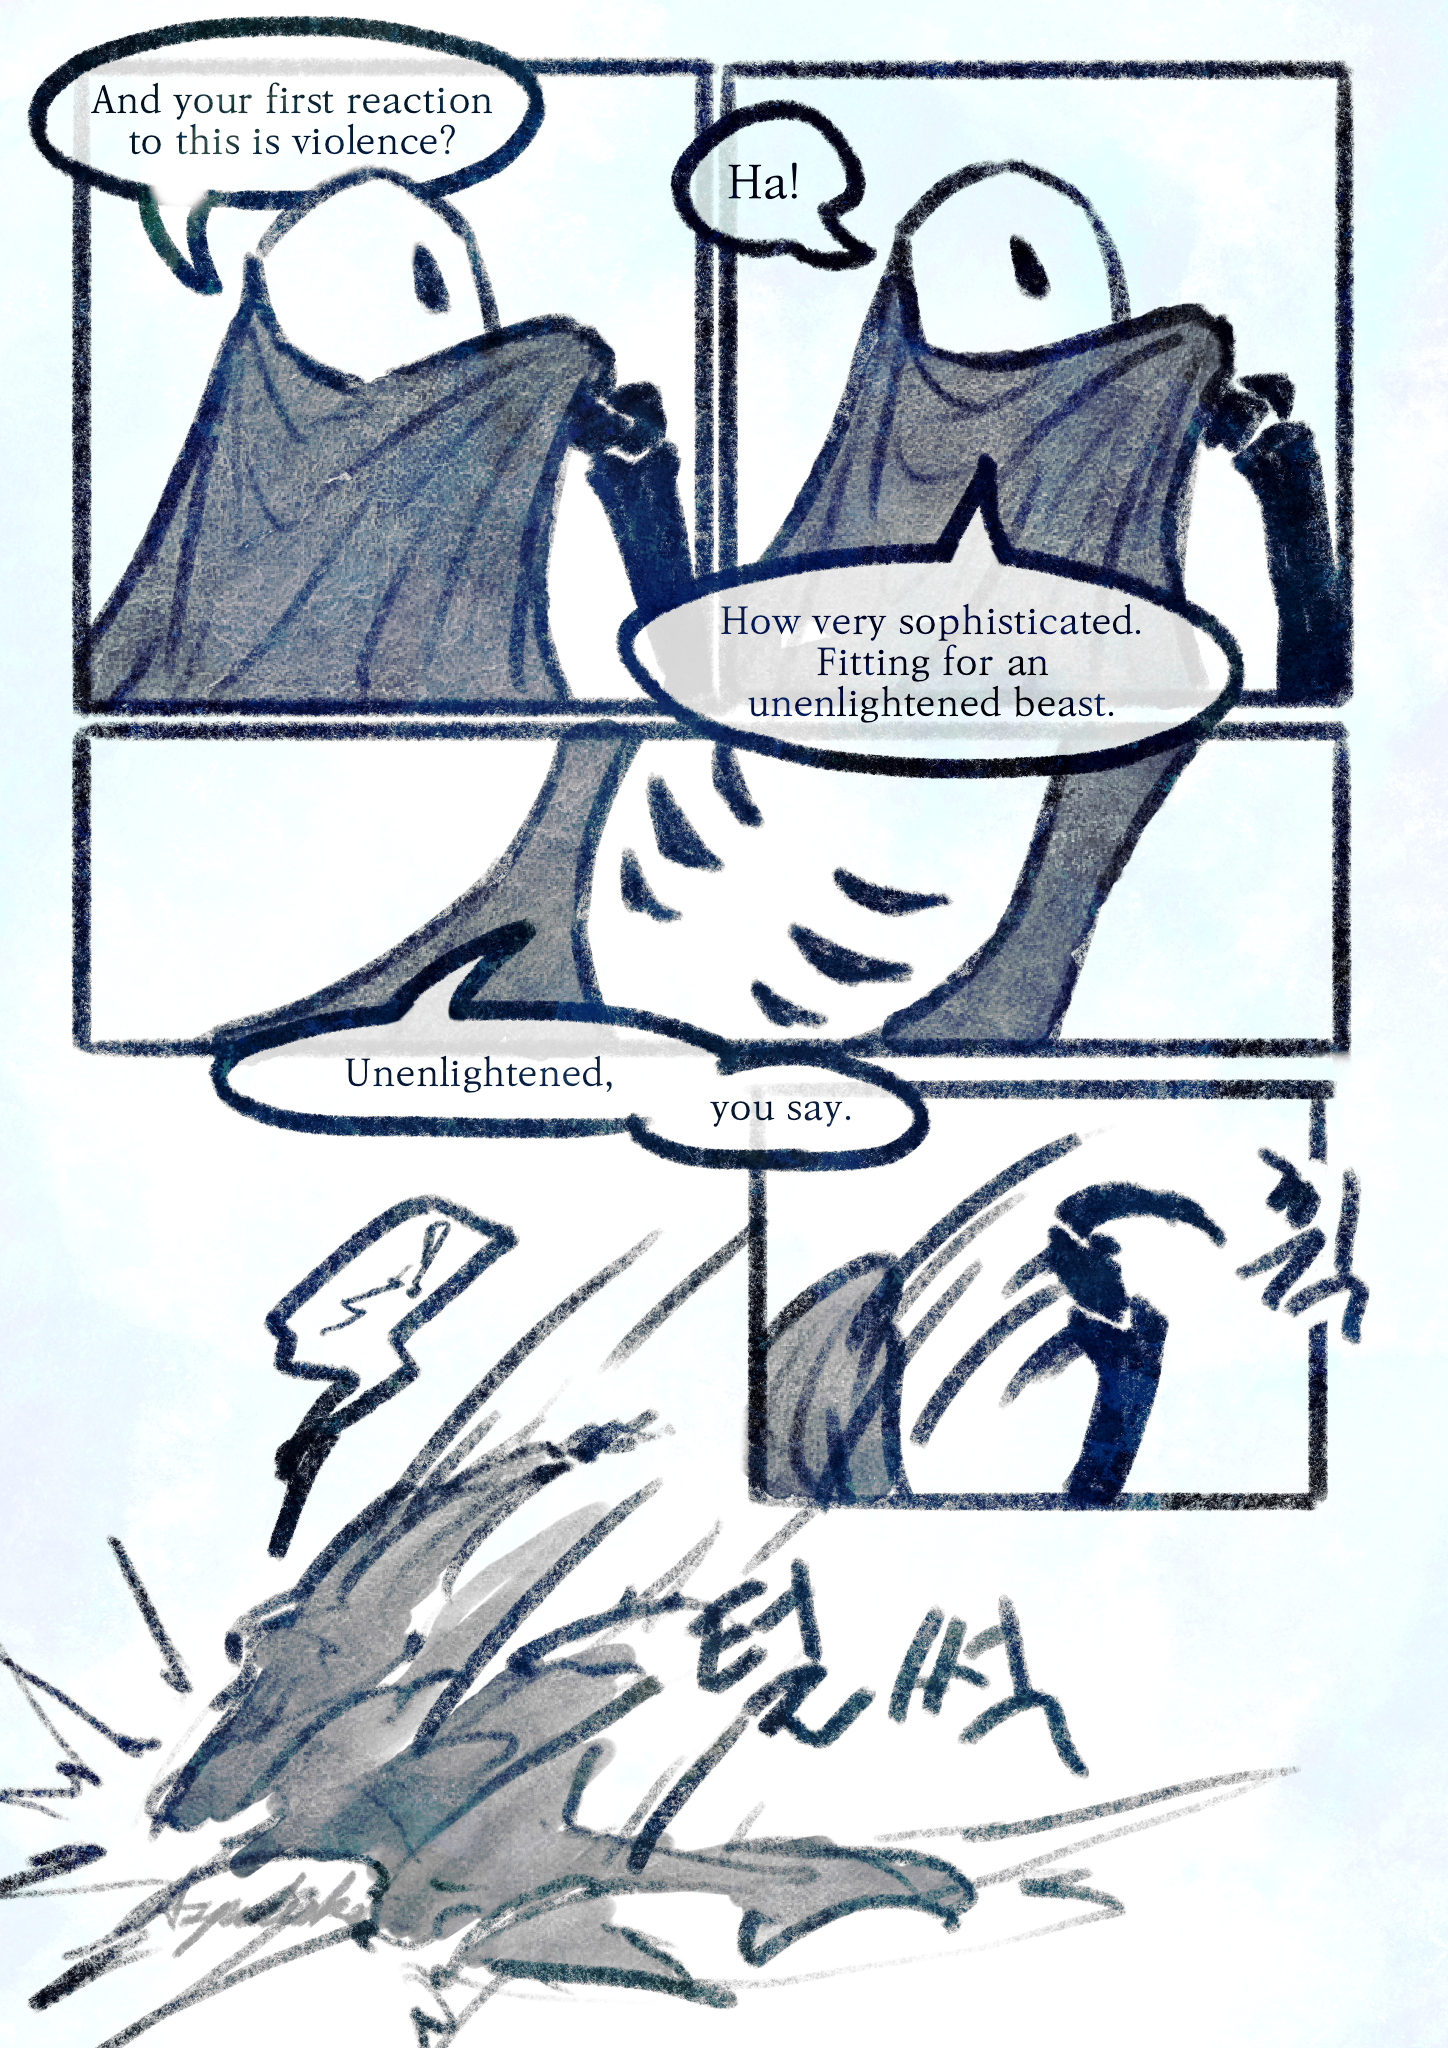 Comic page 4. Lurien mockes Herrah despite being at her mercy. Herrah takes a breath, and throws him to the ground.